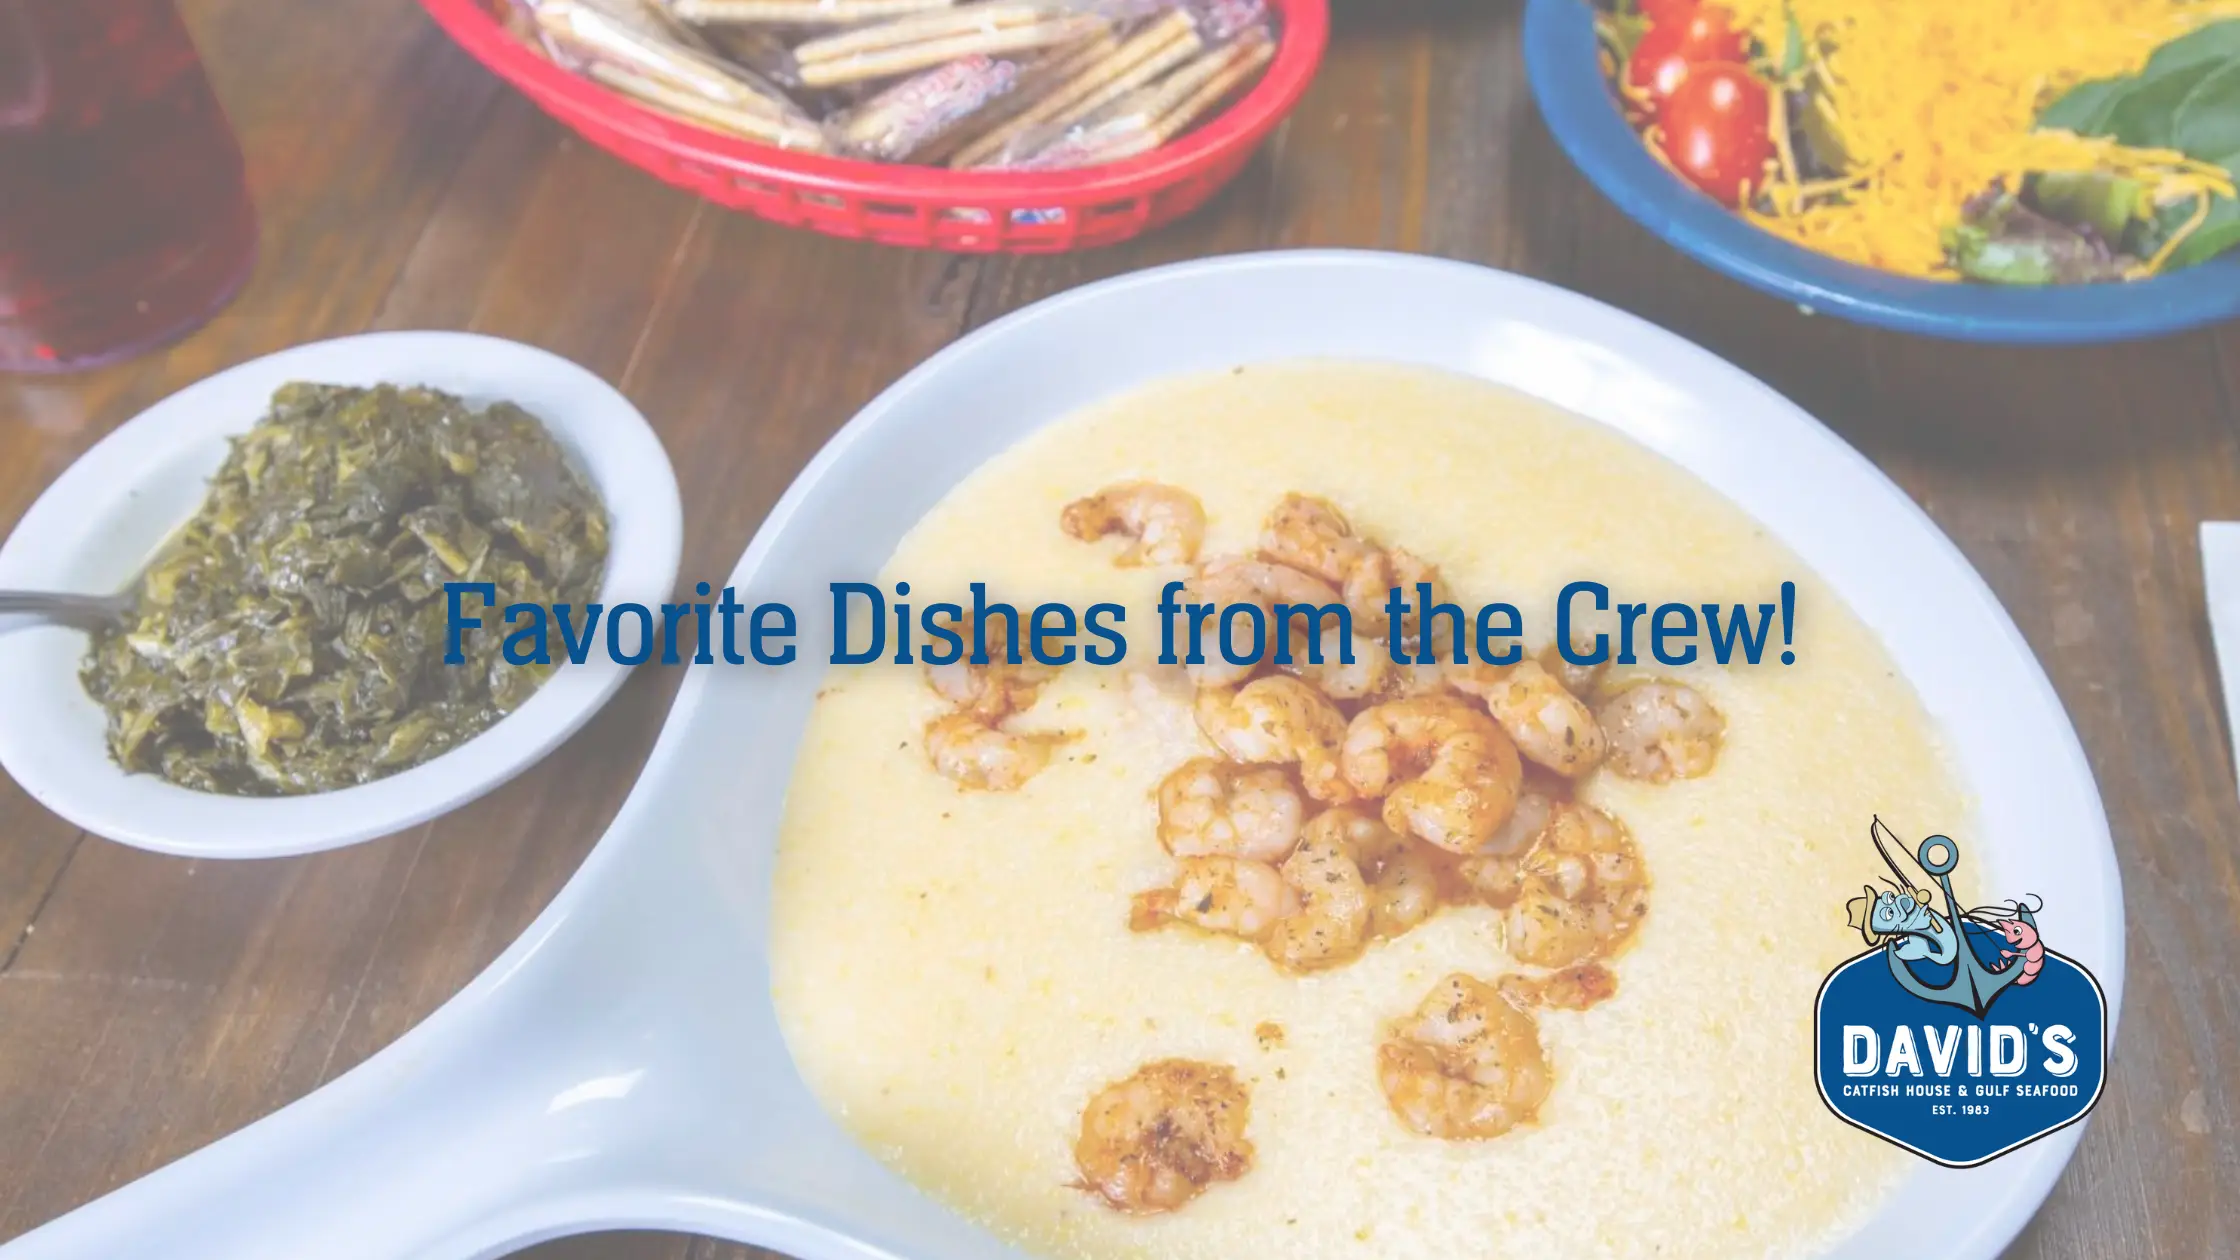 Favorite Dishes from the Crew!